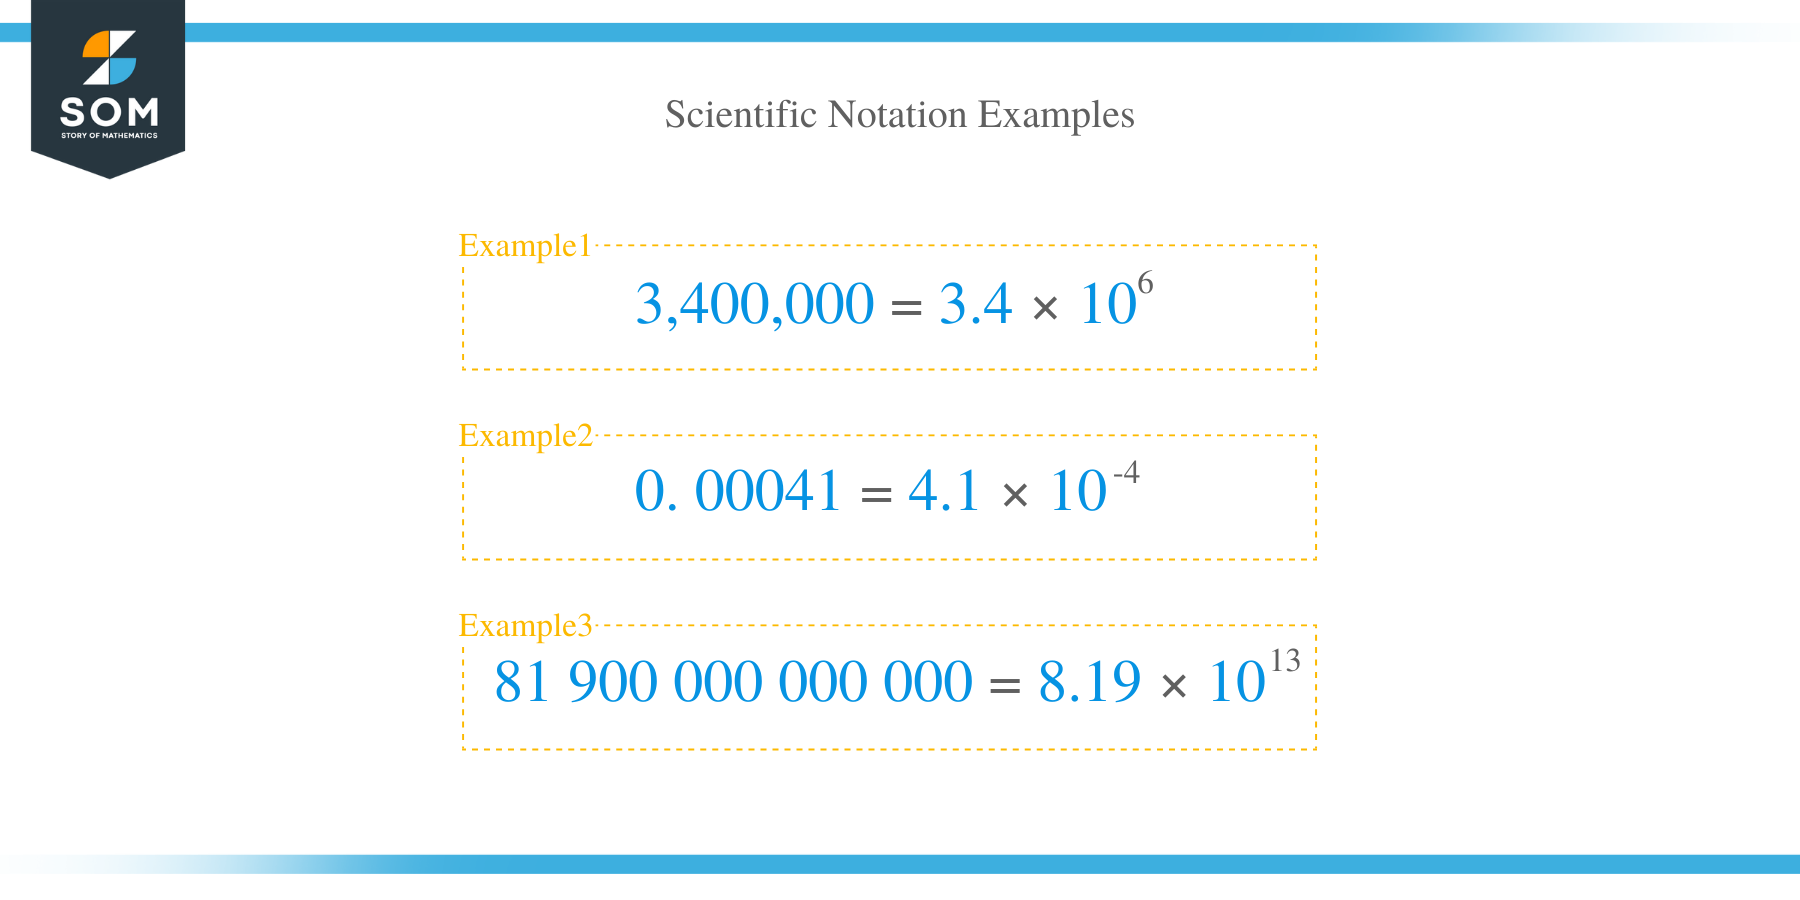 How to Convert to Scientific Notation?